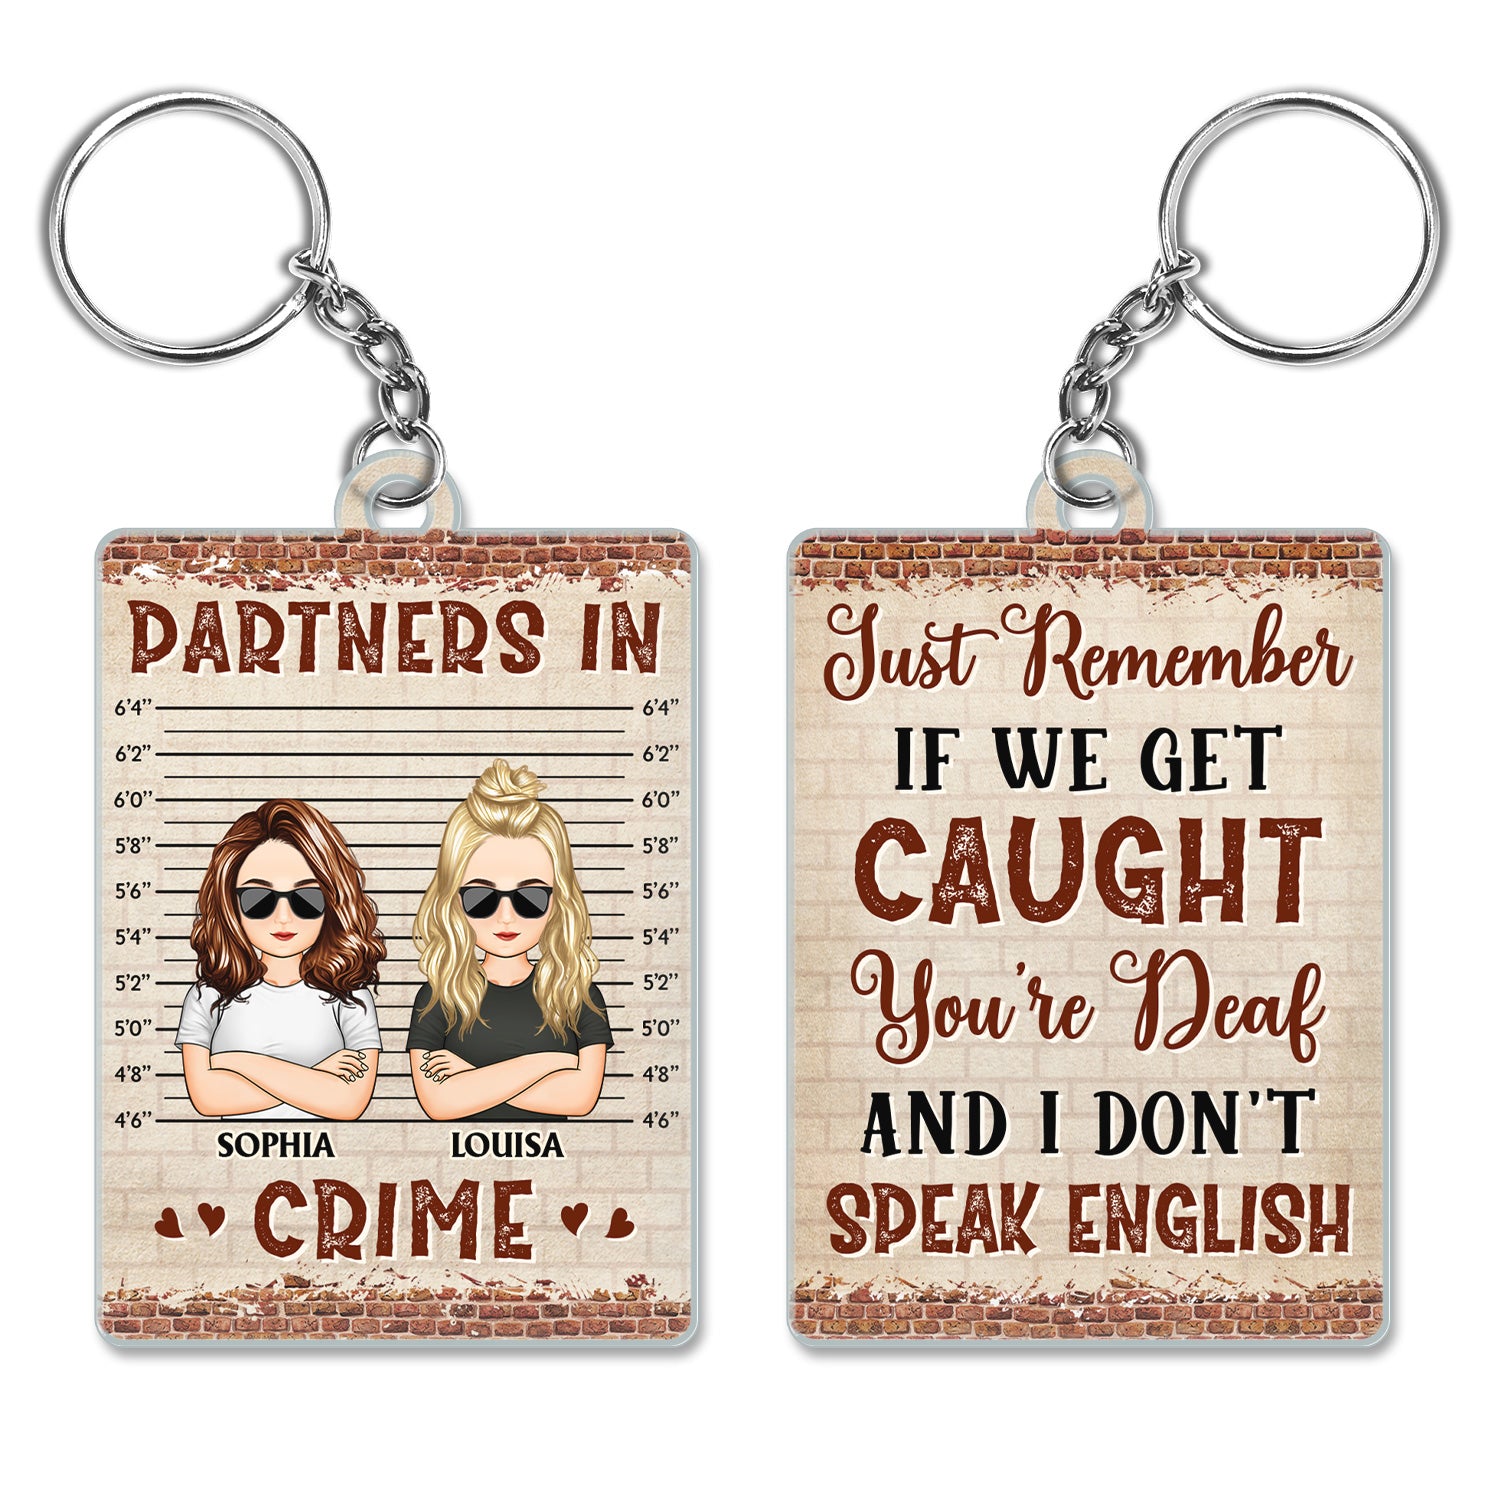 If We Get Caught Partners In Crime - Birthday Gifts For Best Friends, BFF, Brothers, Siblings, Colleagues - Personalized Custom Acrylic Keychain